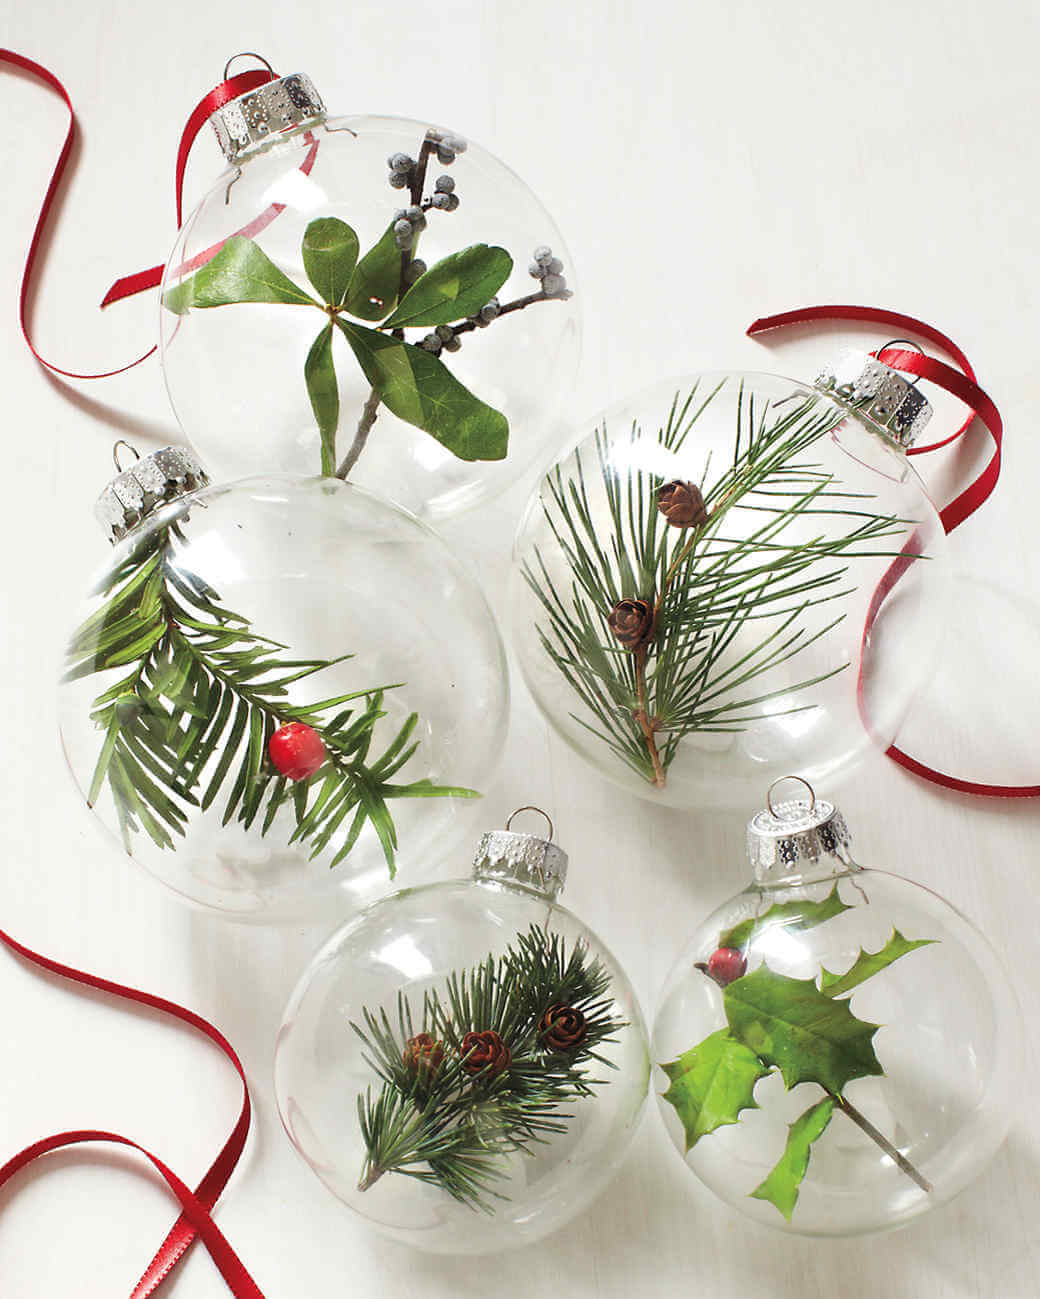 A group of glass ornaments with plants inside of them
